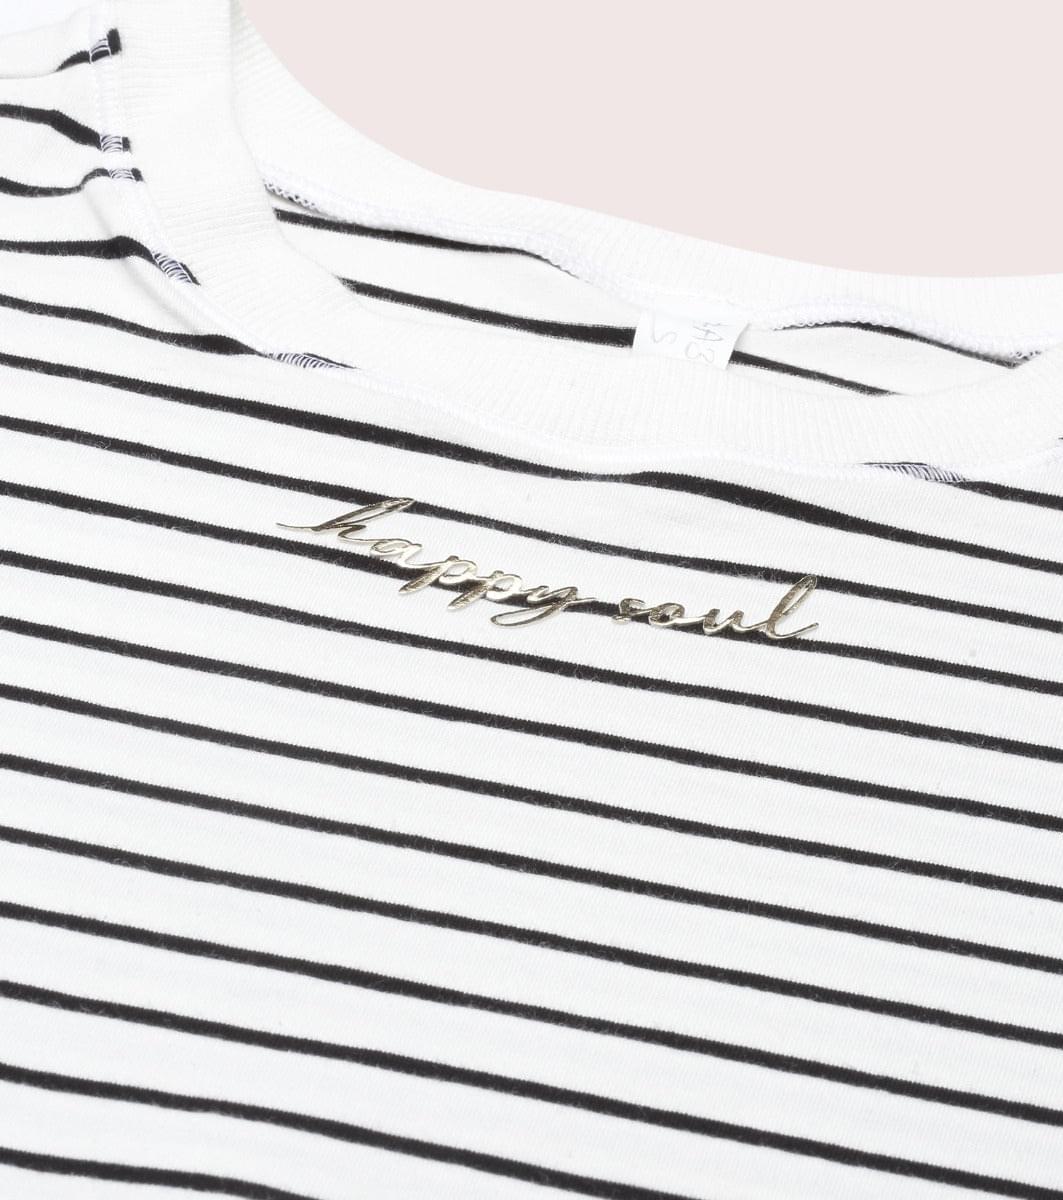 Active Cotton Tee -Stripes | Yarn Dyed Stripe Short Sleeve Anti-Odour Cotton Tee With Graphic